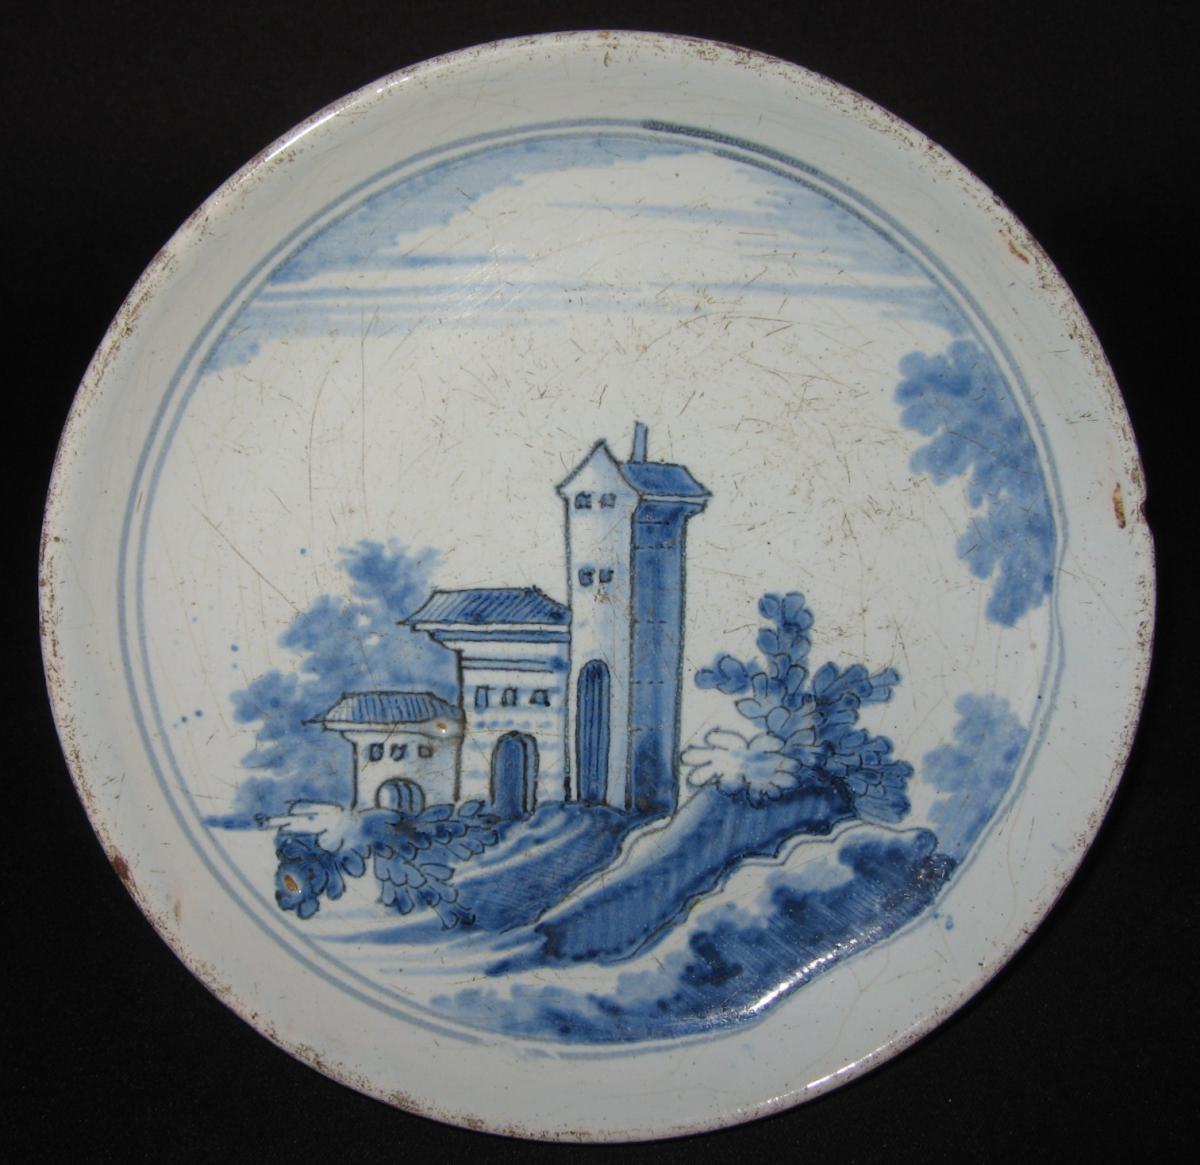 In Earthenware Plate From Nevers XVII Century